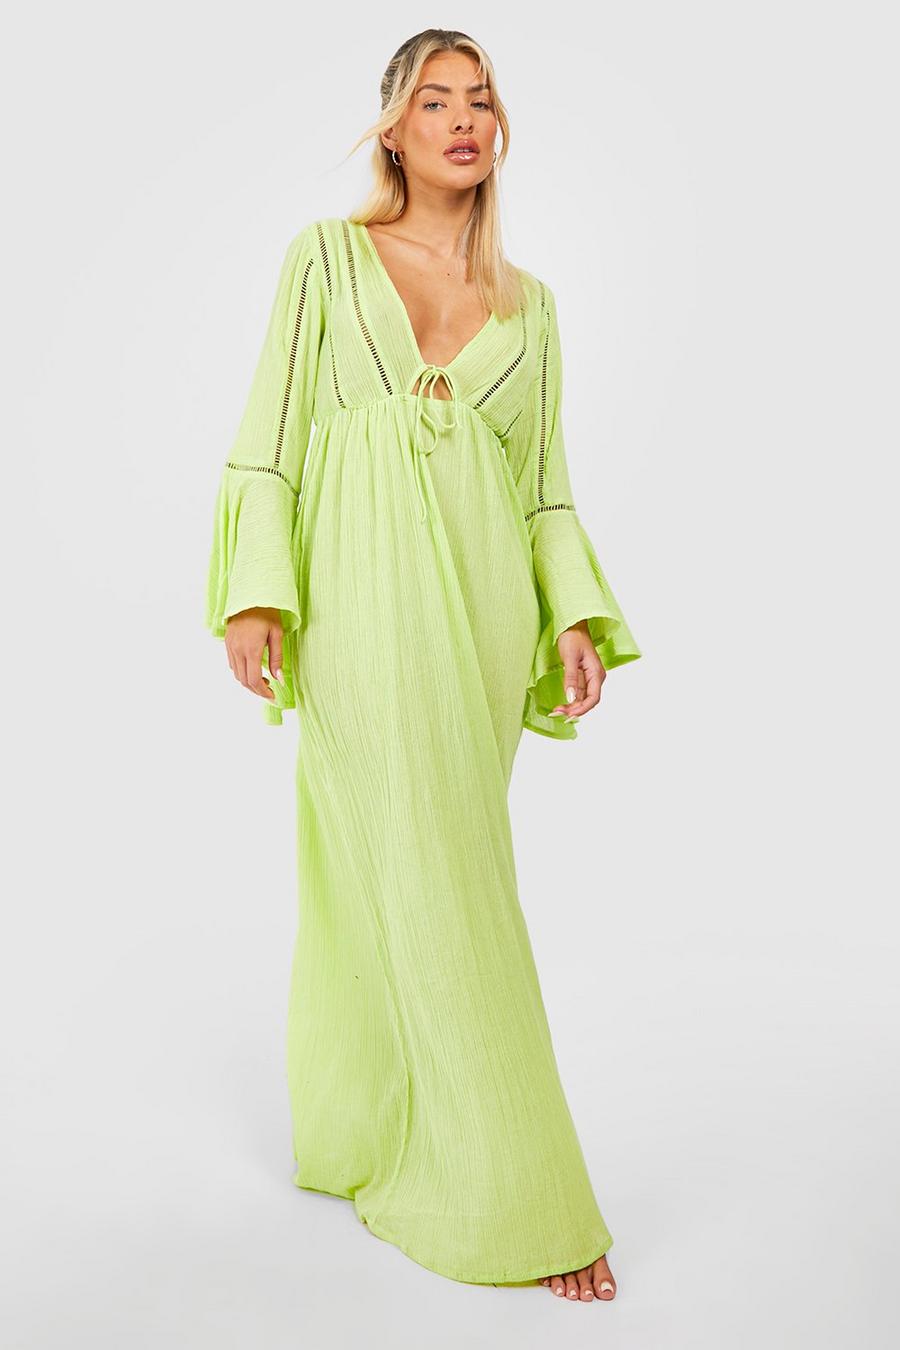 Washed lime yellow Tie Detail Frill Sleeve Beach Maxi Dress